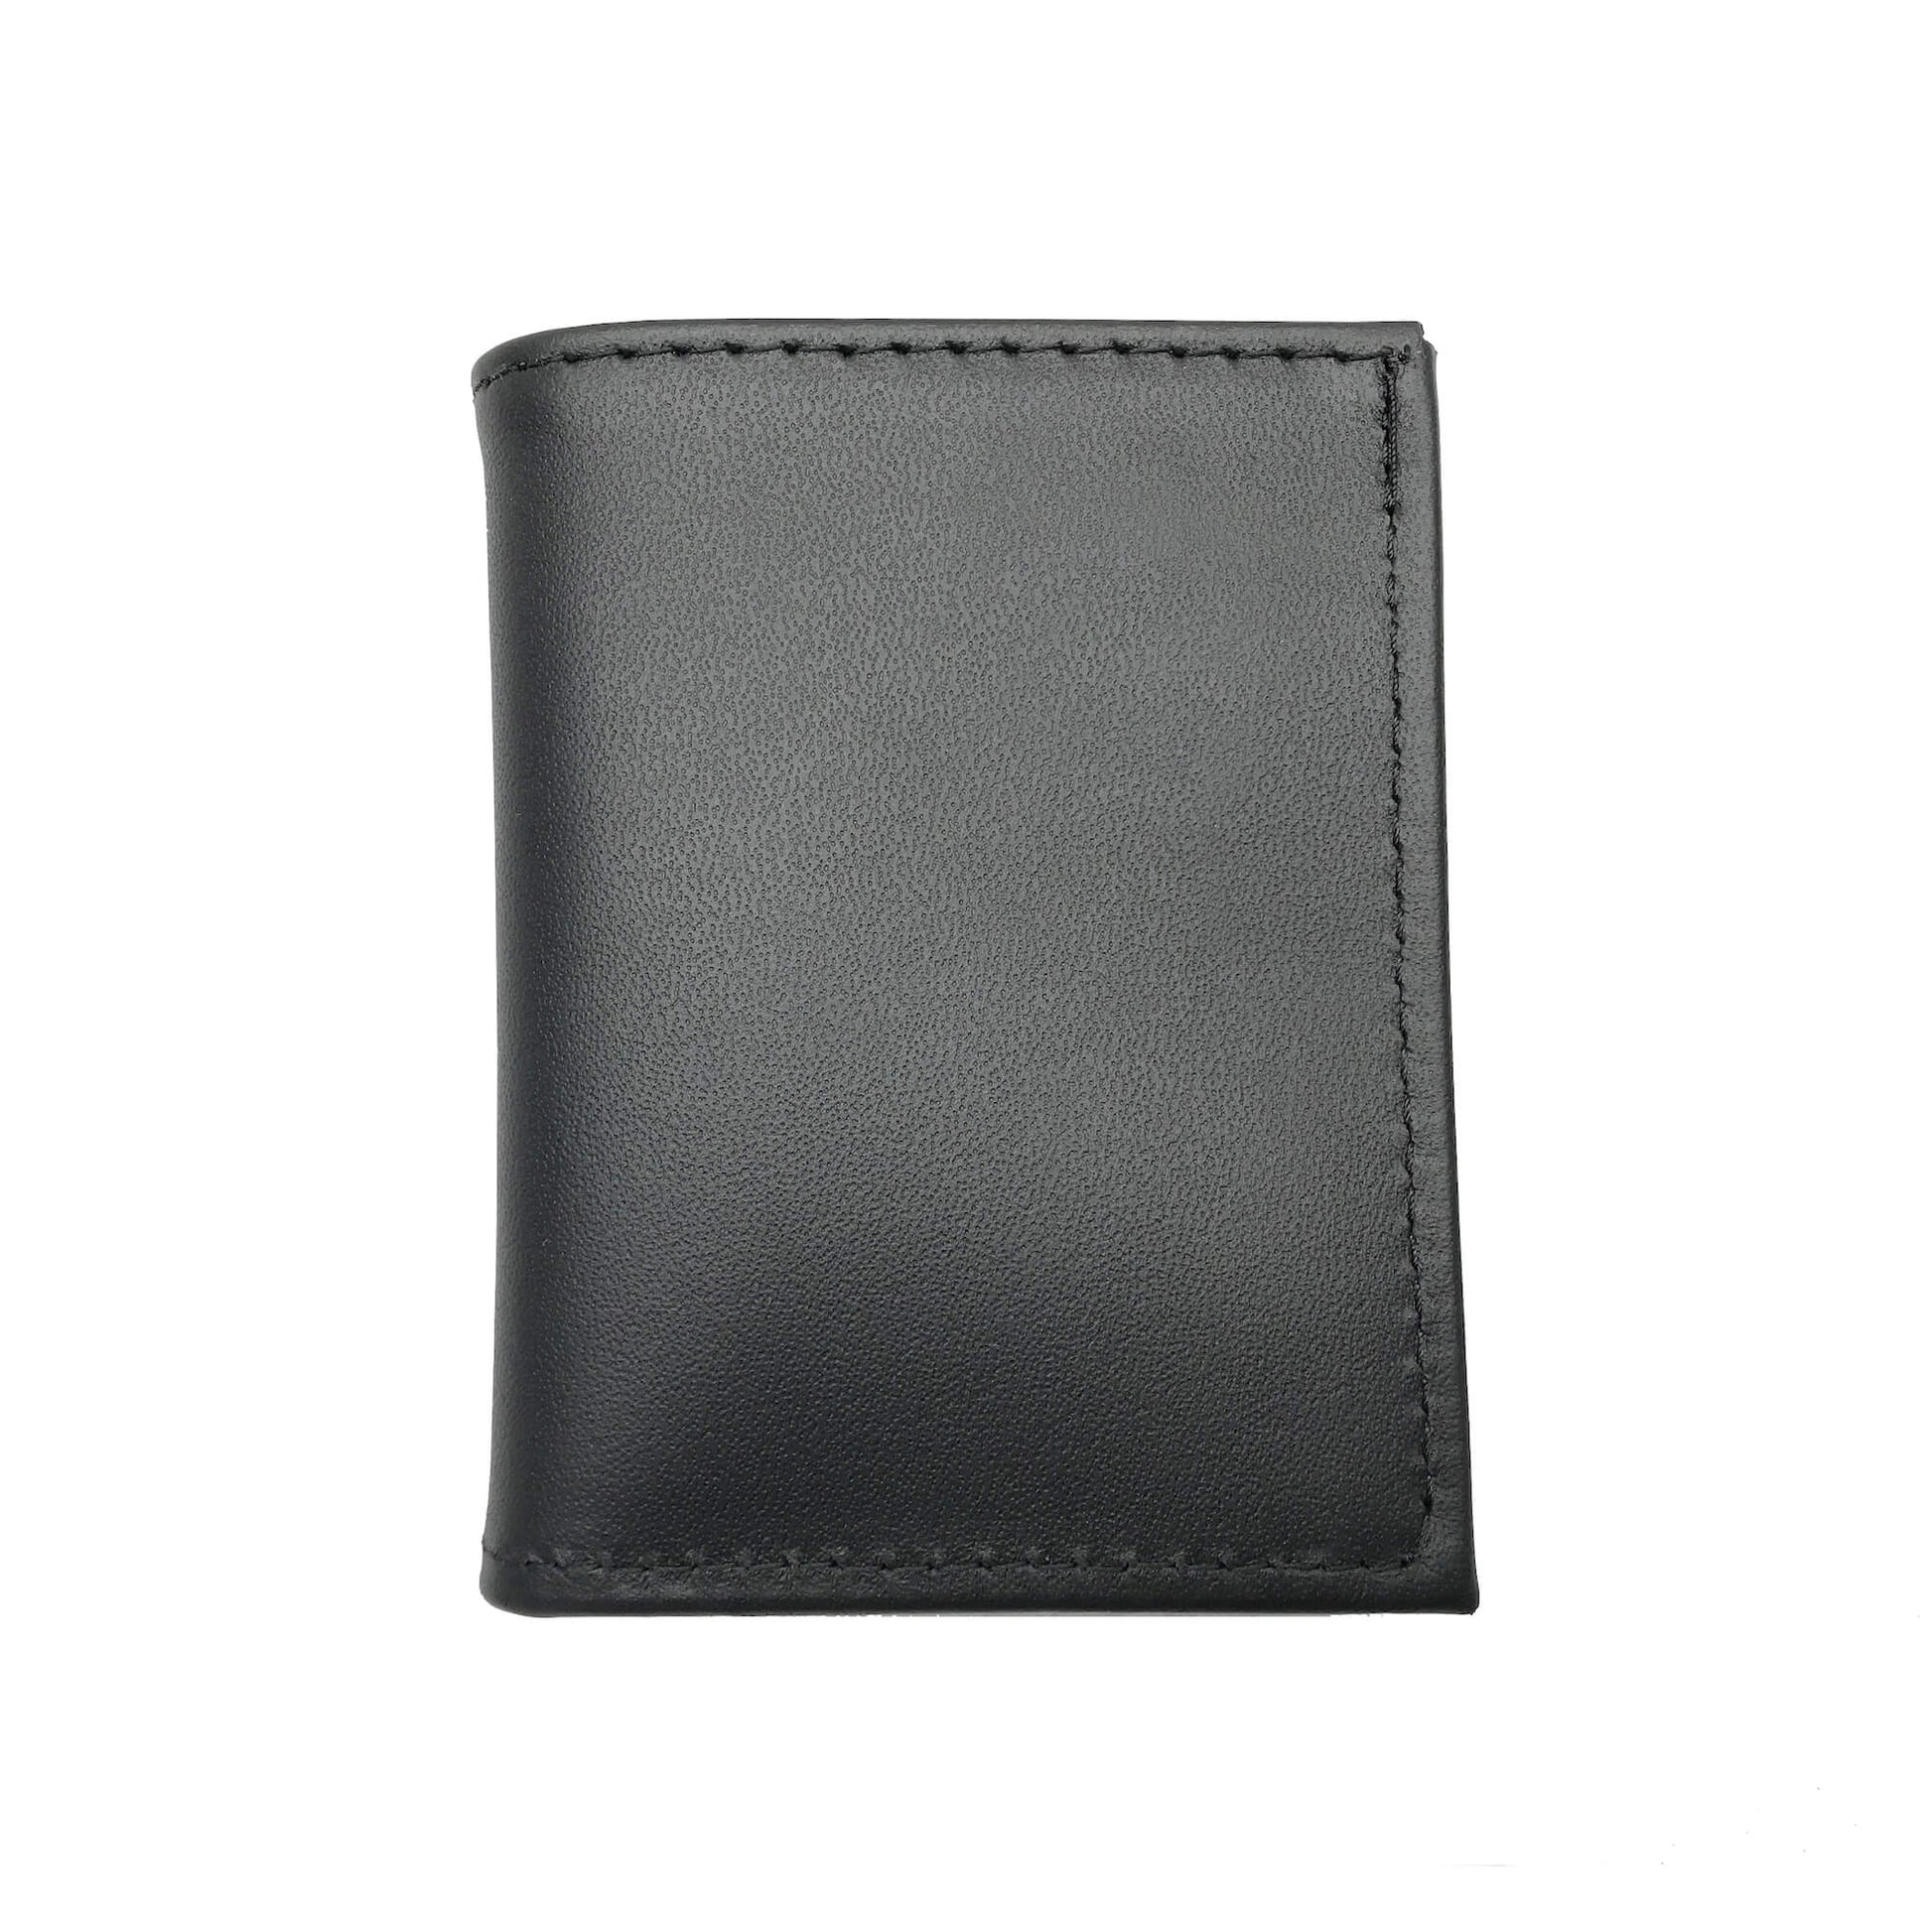 Los Angeles Police Department - LAPD Bifold Hidden Badge Wallet-Perfect Fit-911 Duty Gear USA